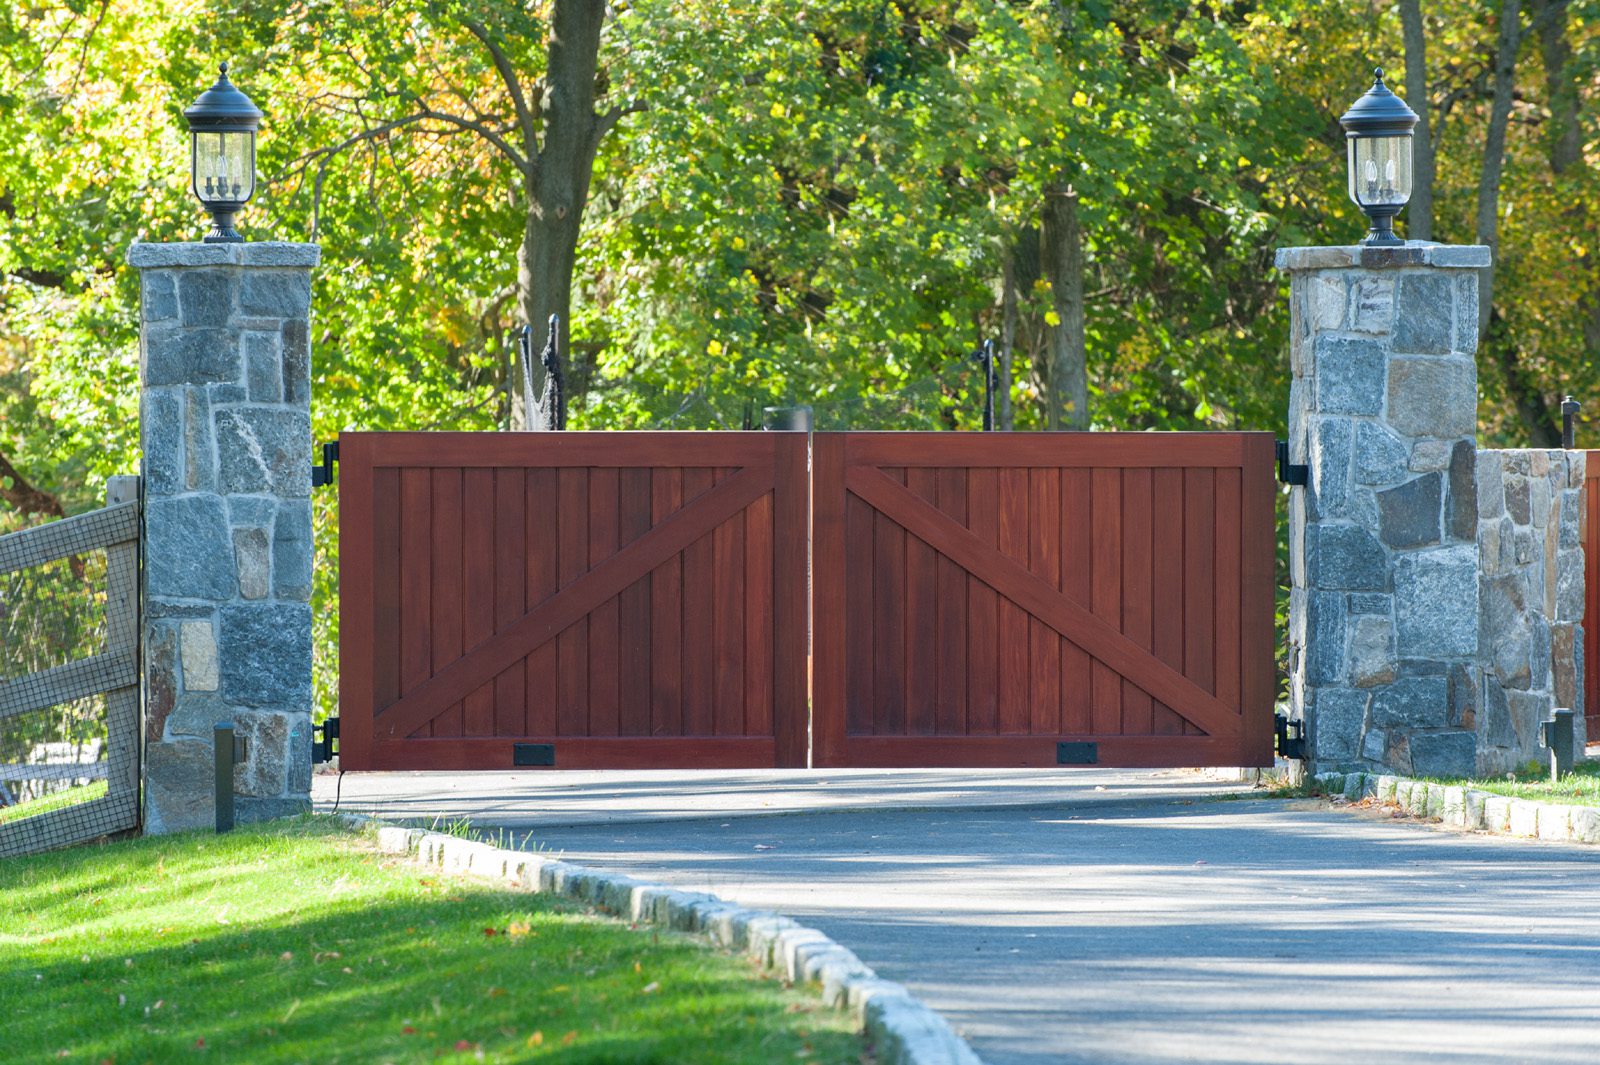 wooden driveway gate with large stone block pillars and lighting